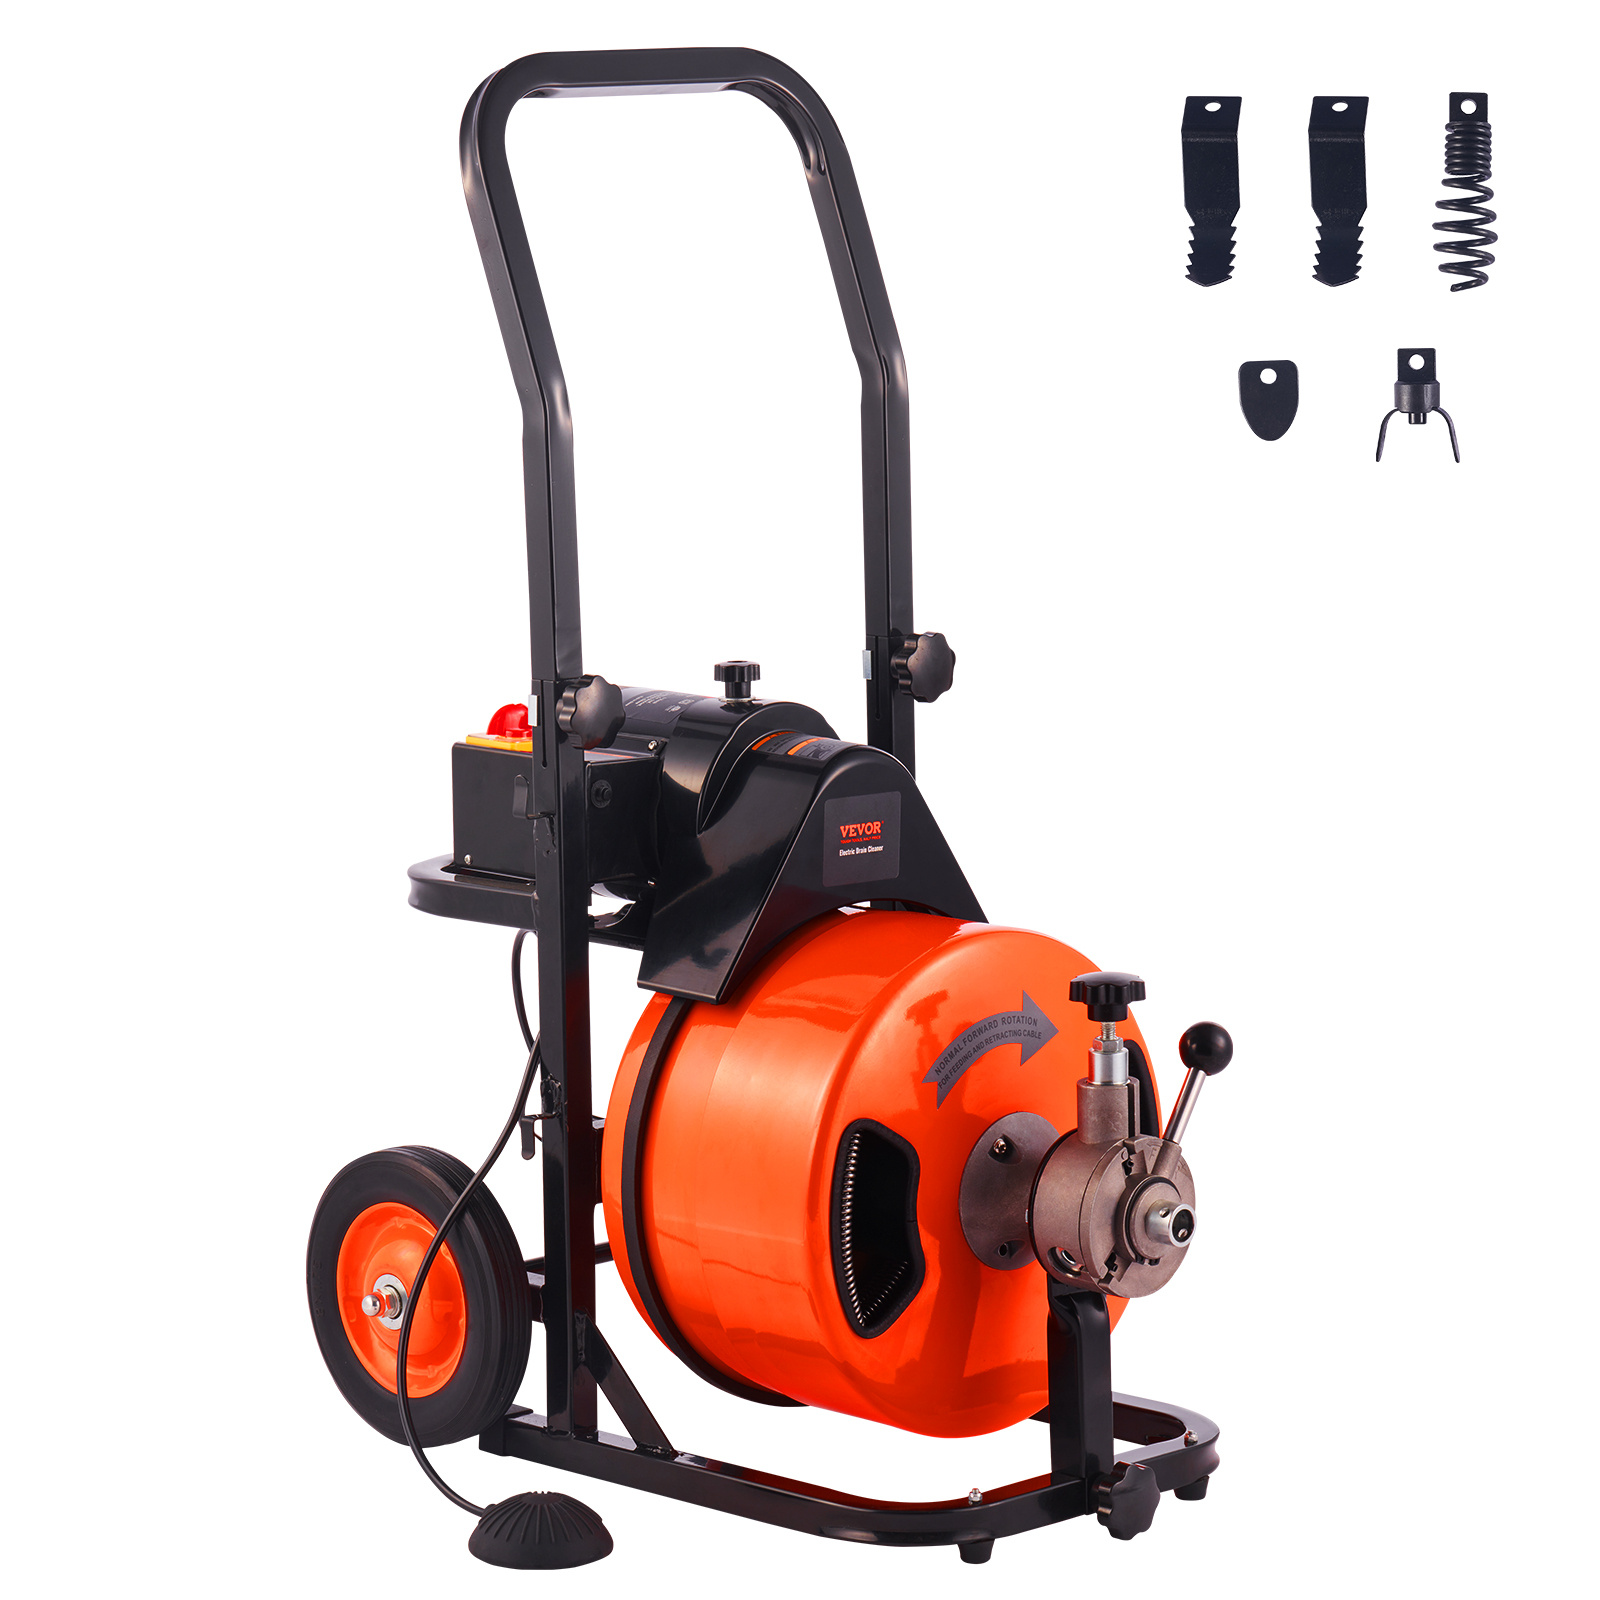 

Vevor Drain Cleaning Machine 75 Ft X 1/2 Inch, Sewer Auger Auto Feed With 4 Cutter & Air-activated Foot Switch For 1" To 4" Pipes, Orange, Black